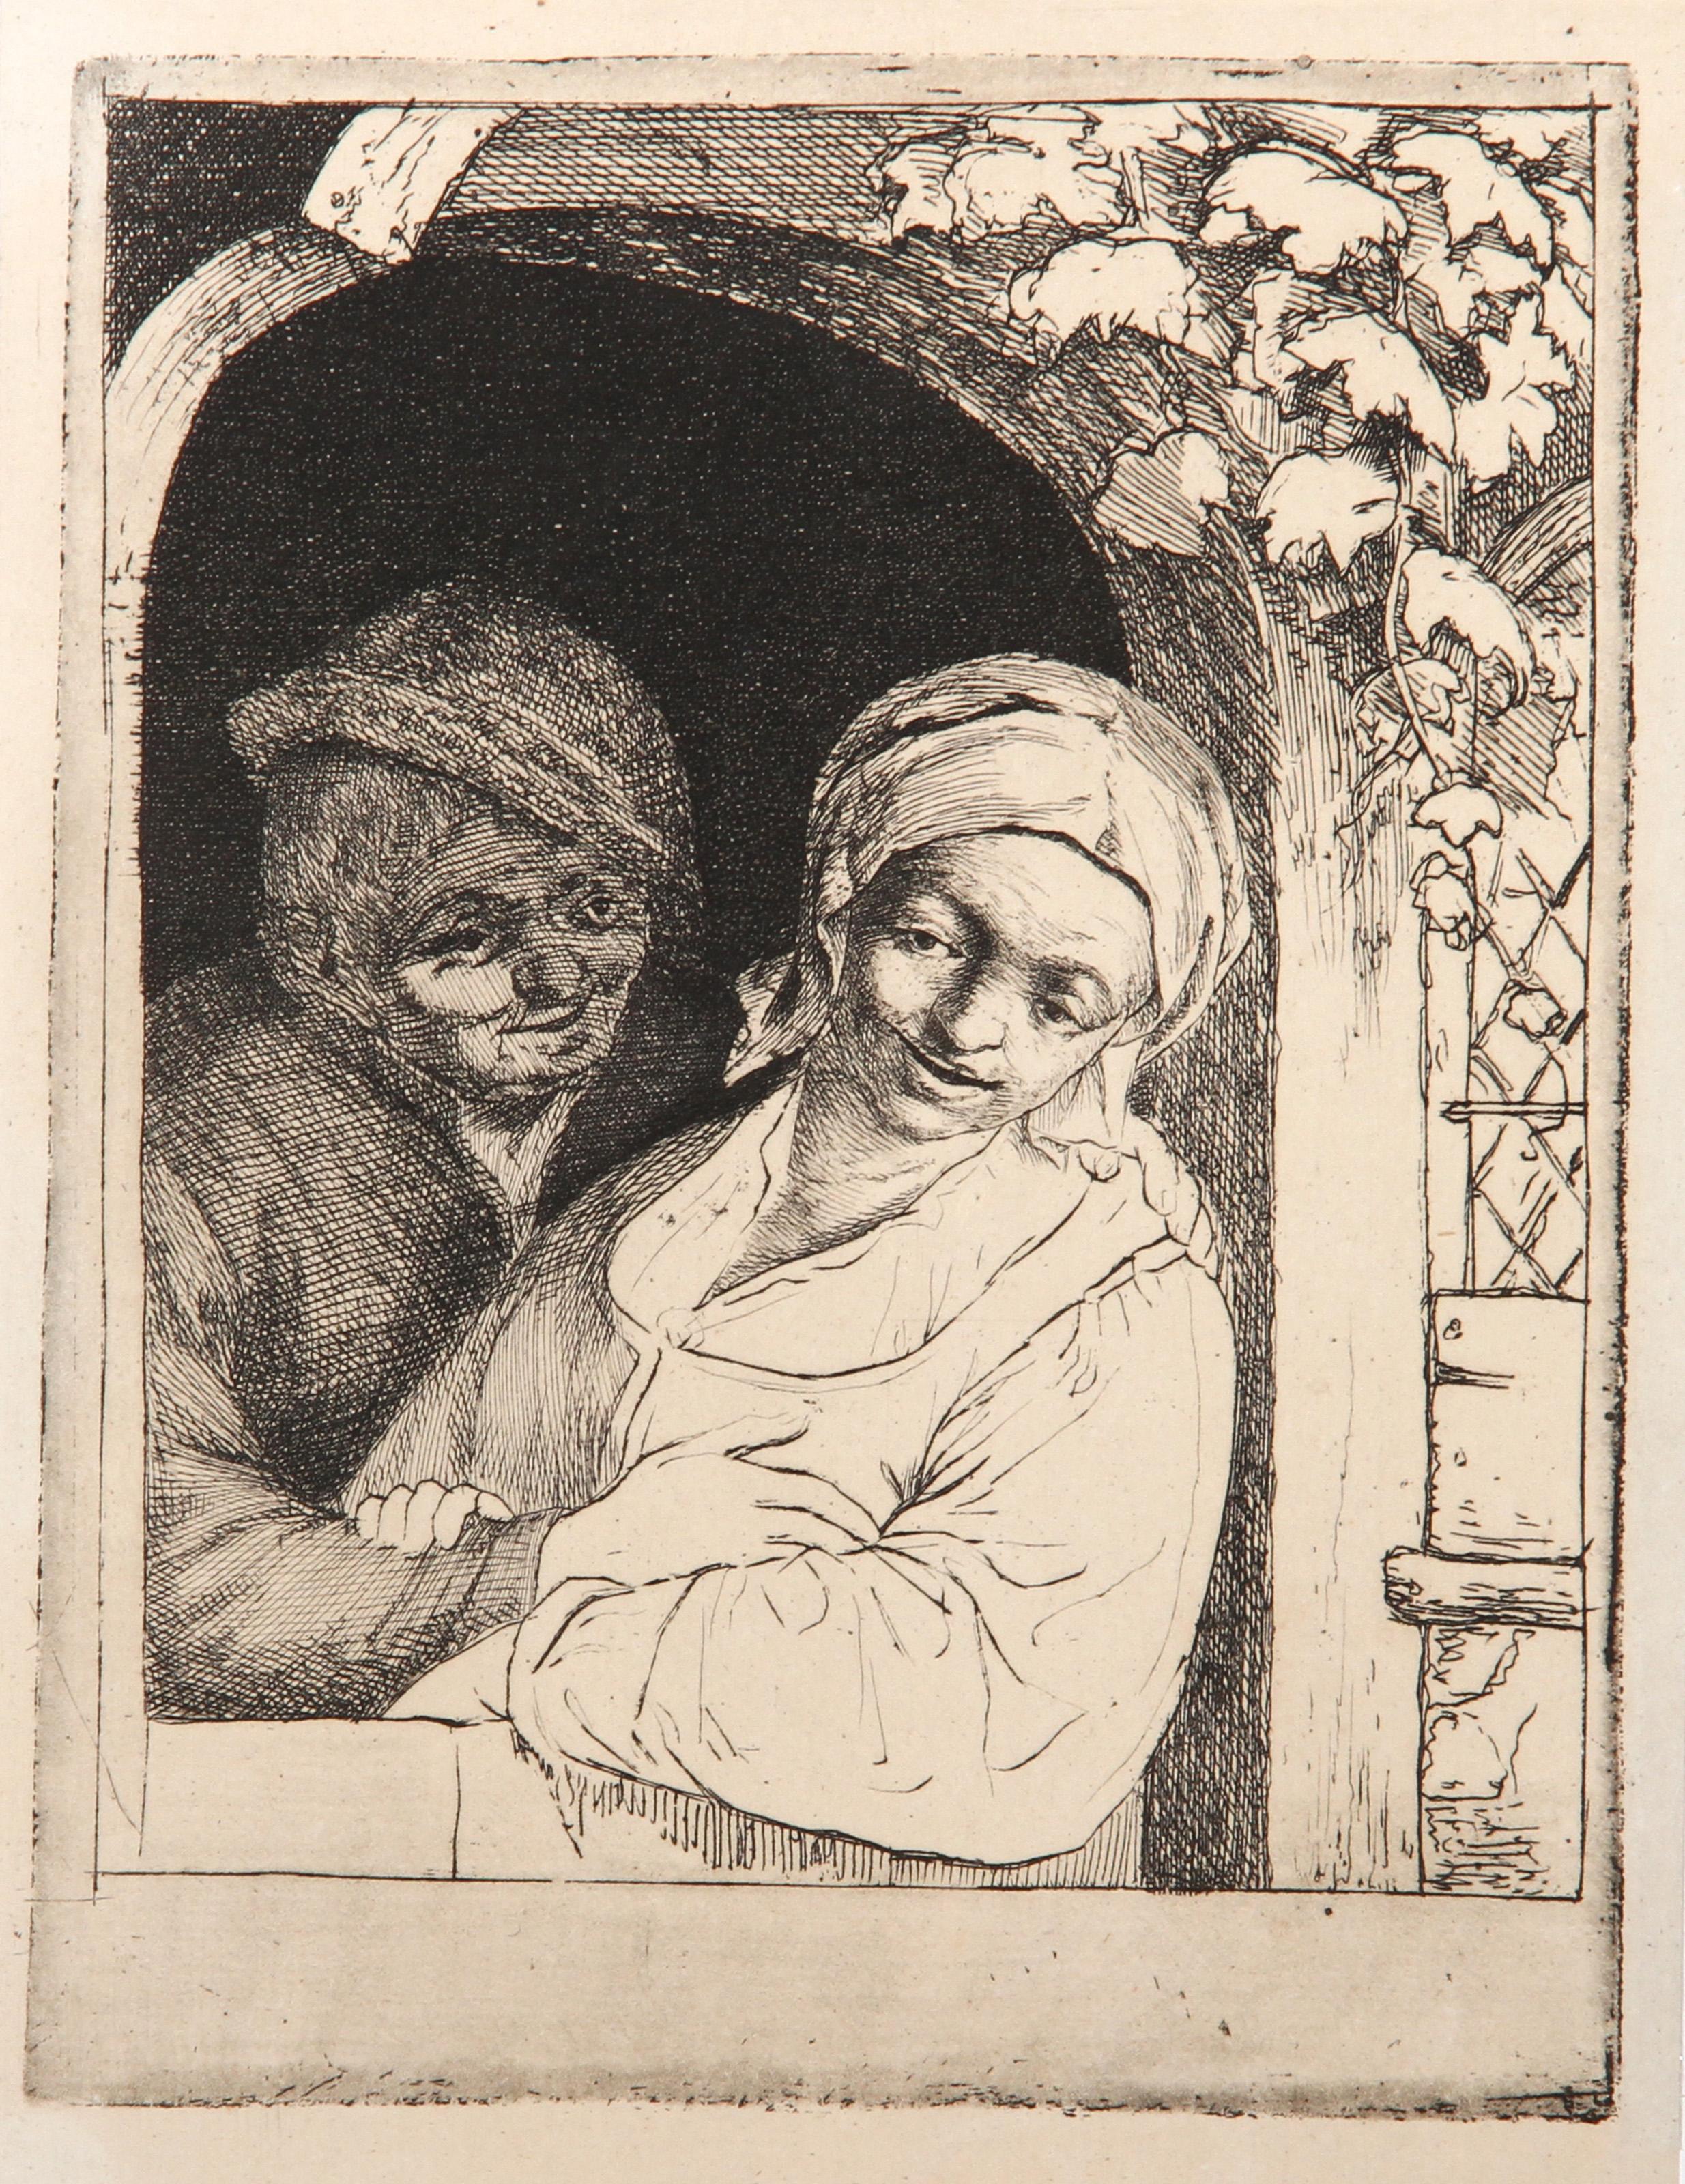 Artist: Adriaen van Ostade, After by Amand Durand, Dutch (1610 - 1685) - La Tendresse Champetre, Medium: Heliogravure, Size: 7.5  x 5.5 in. (19.05  x 13.97 cm), Printer: Amand Durand, Description: French Engraver and painter Charles Amand Durand,